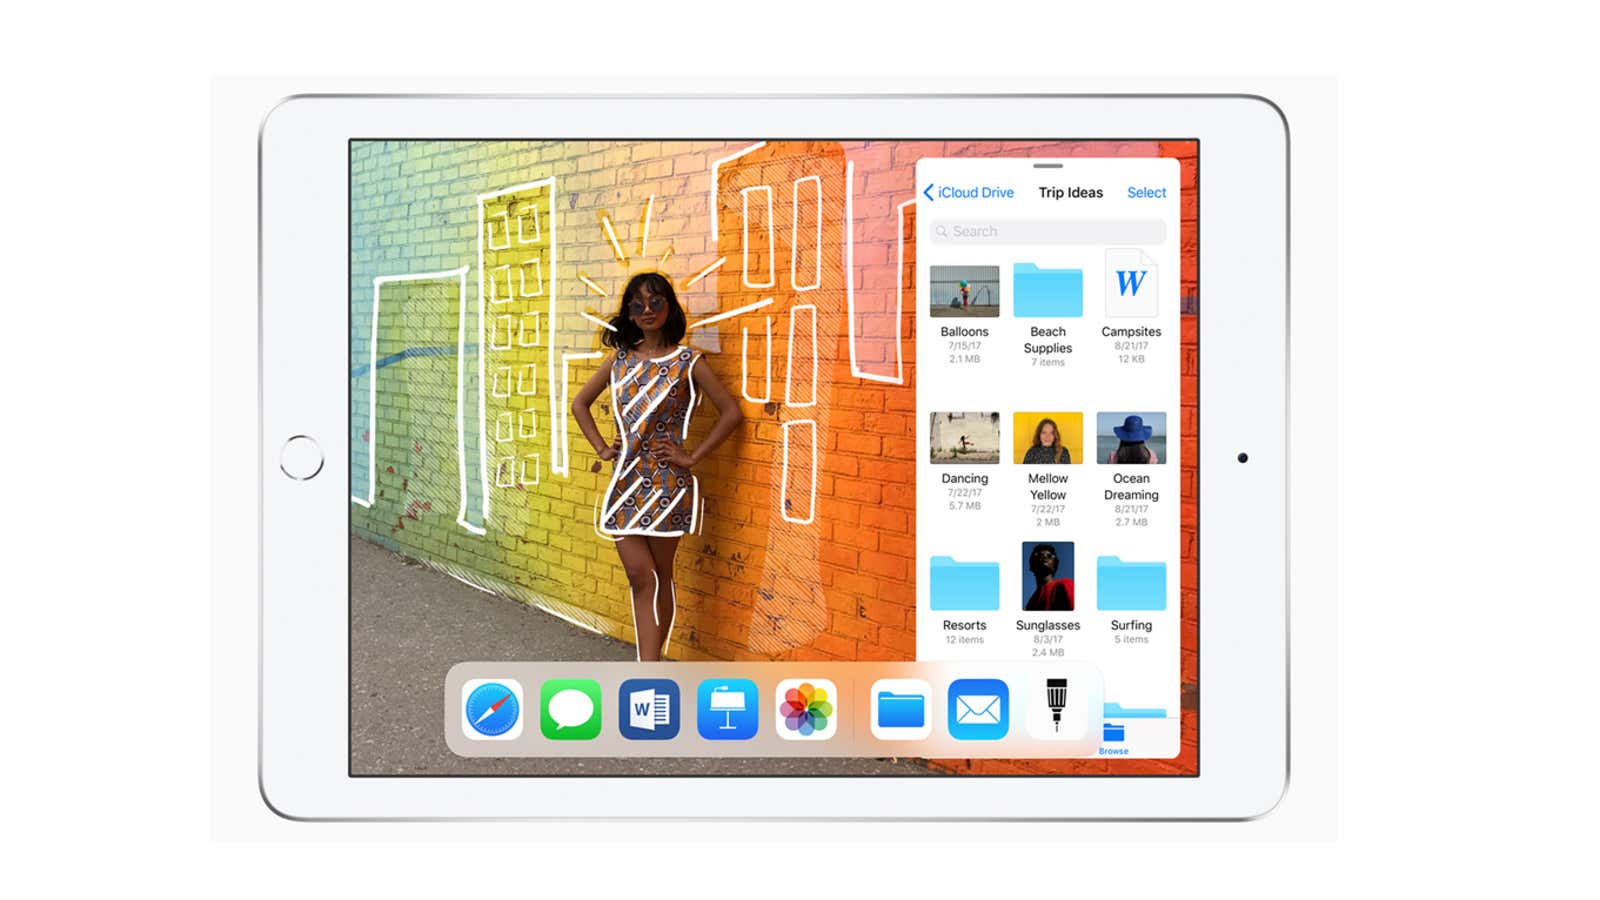 Apple is selling iPads $100 cheaper on Amazon and Walmart than on its own website